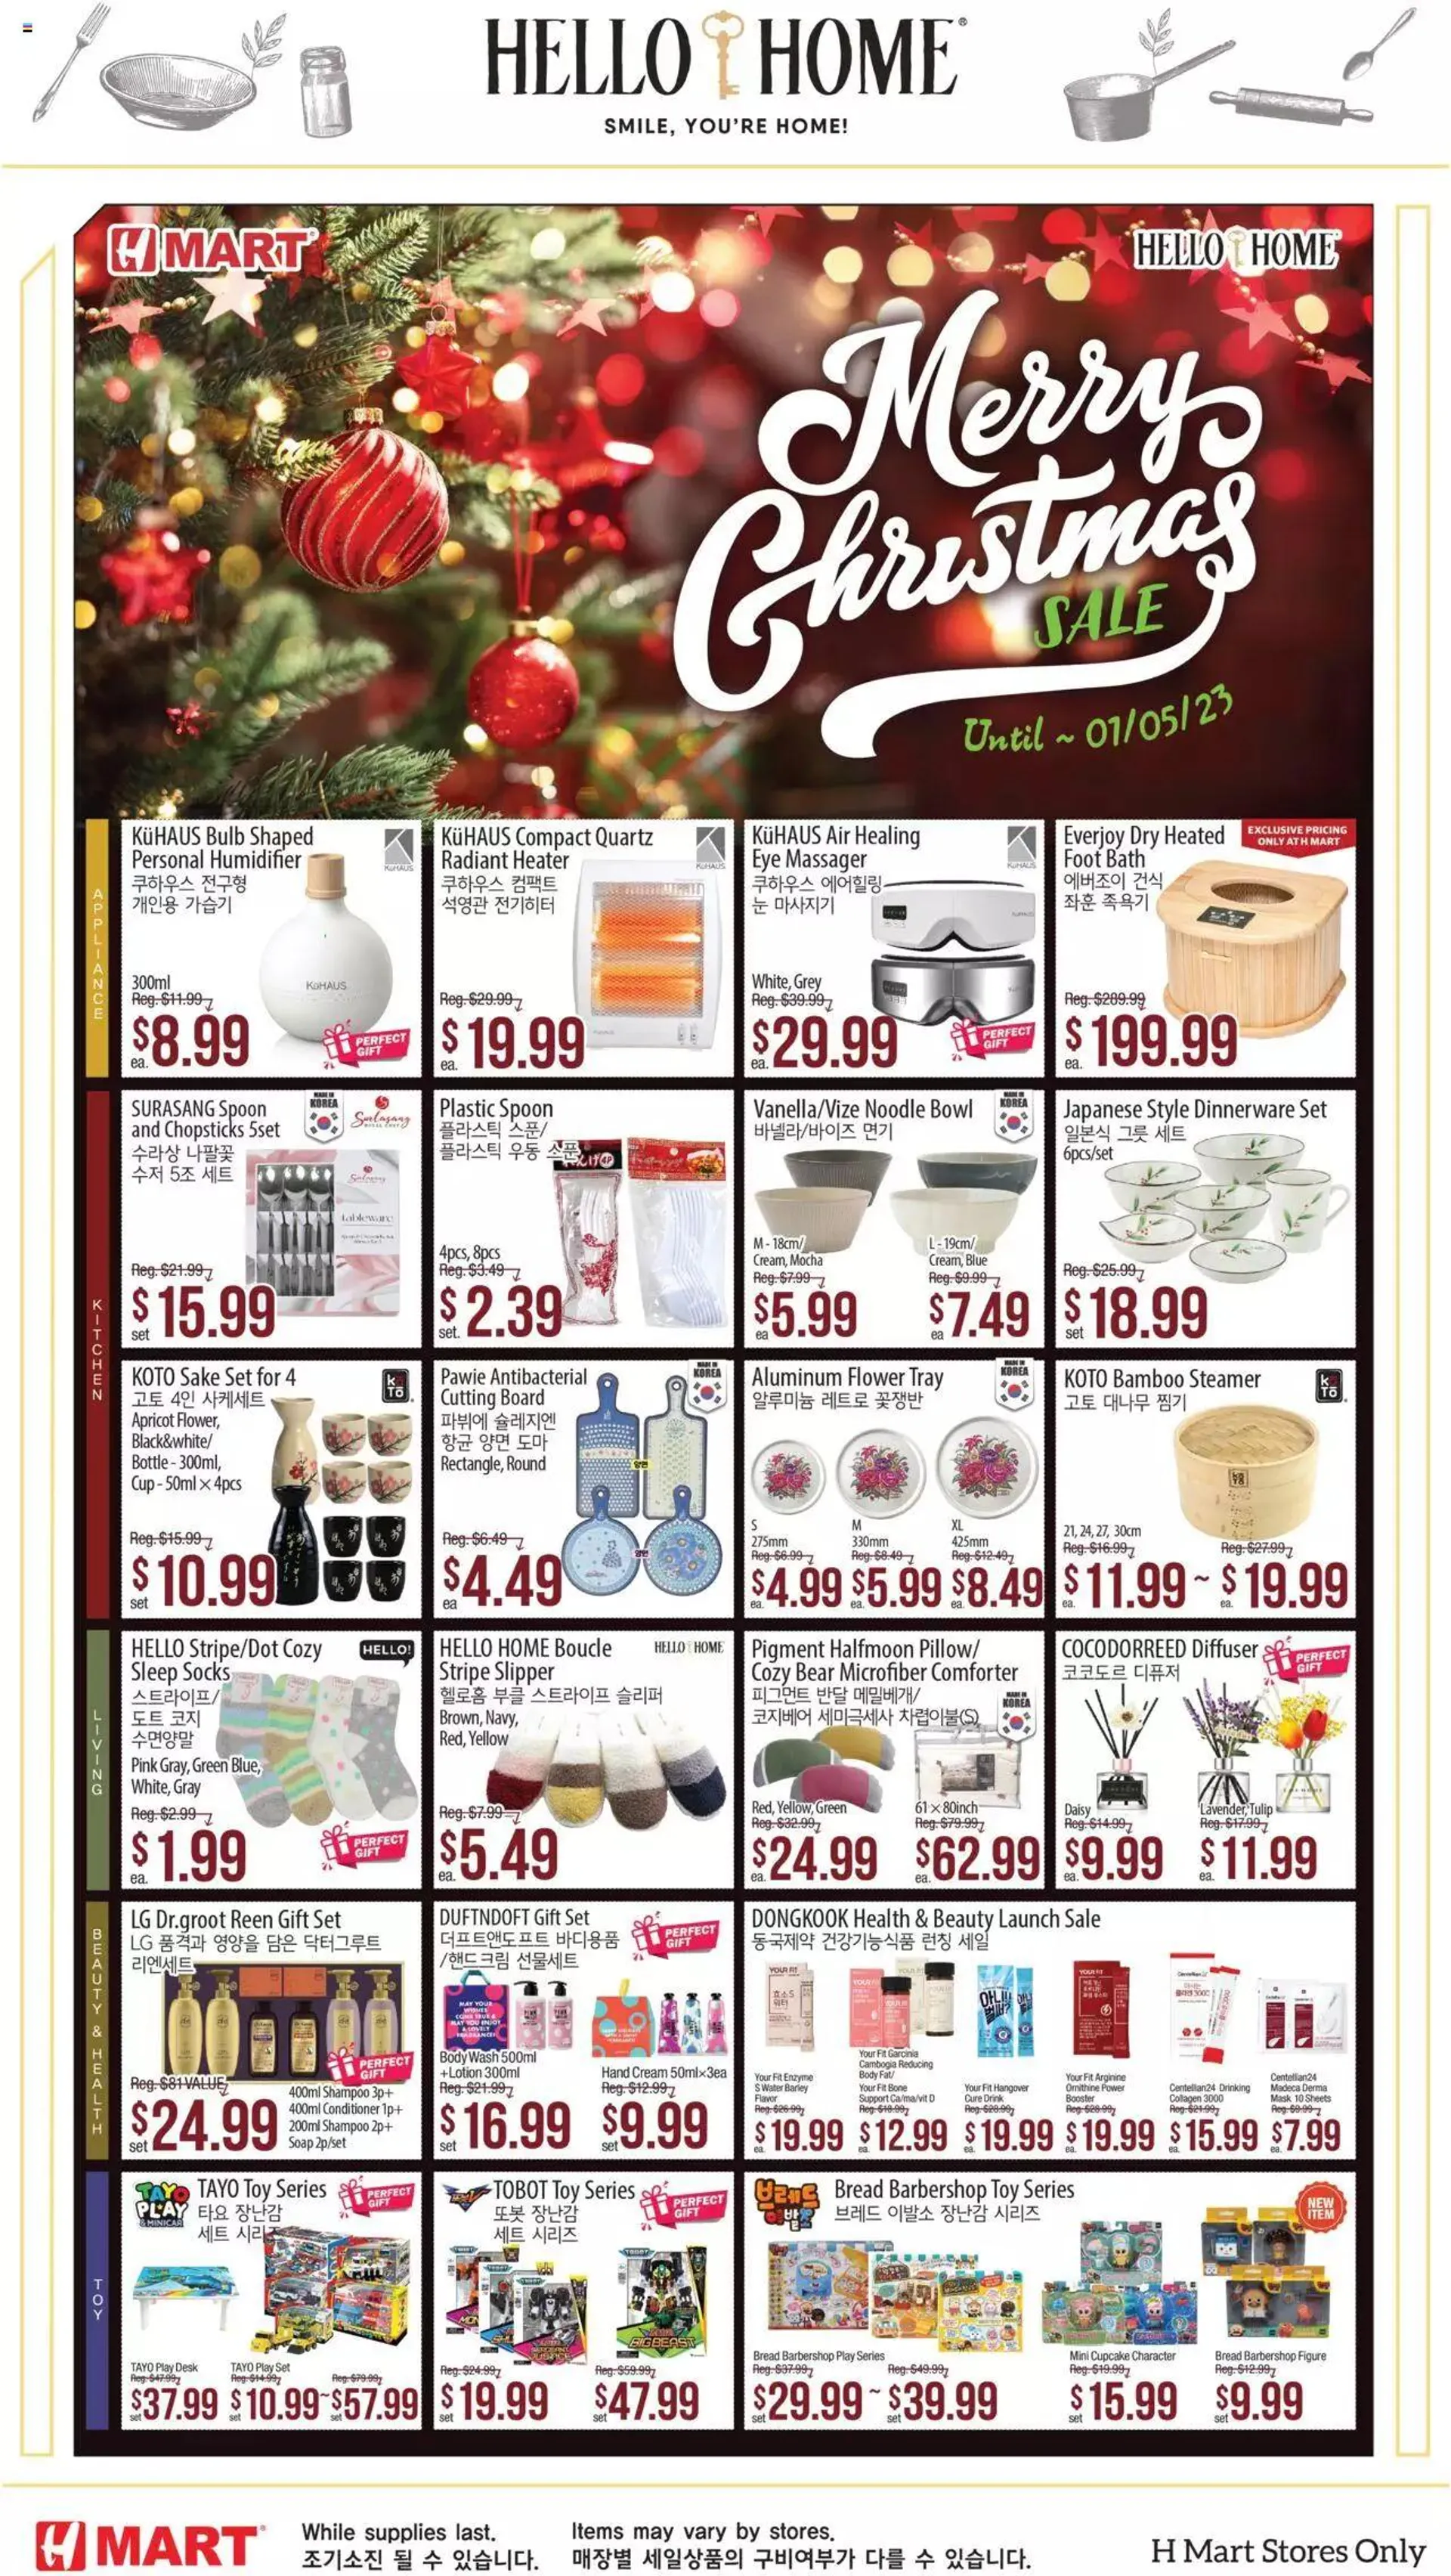 Hmart - Weekly sales on New York & New Jersey HOUSEWARE SALE - New York & New Jersey